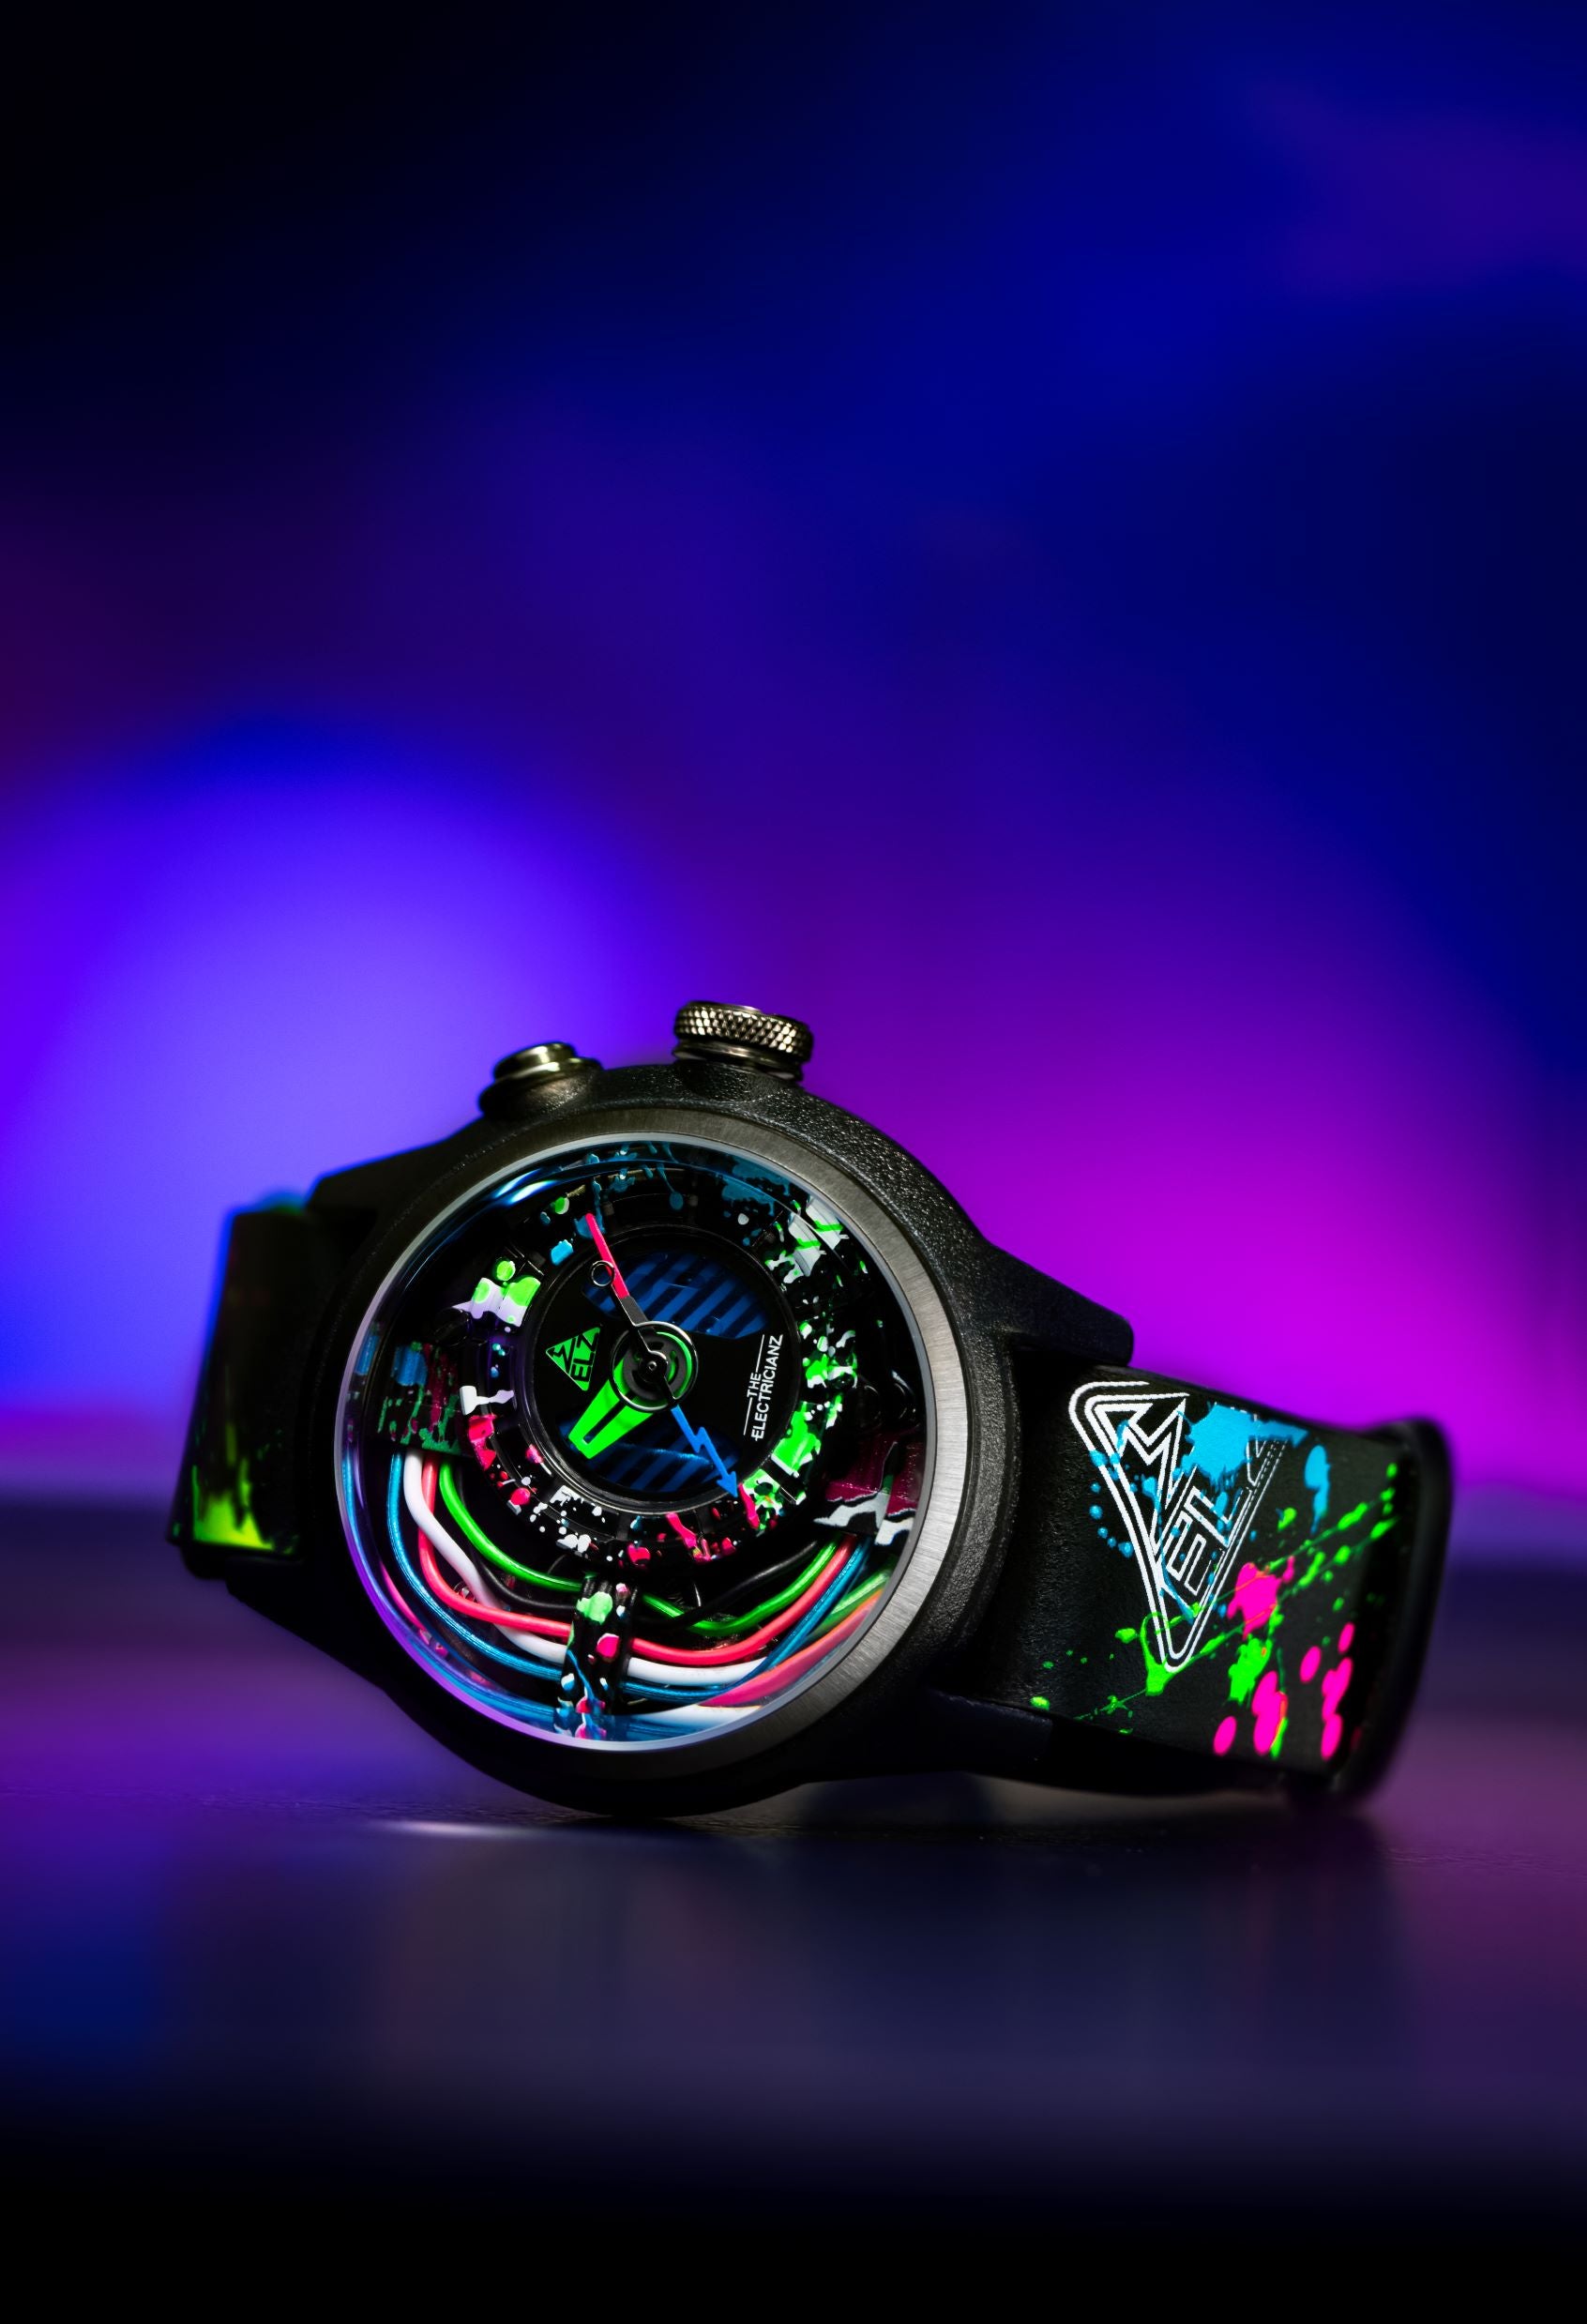 The Neon Z 42mm Black & White Limited EDITIONS – THE ELECTRICIANZ